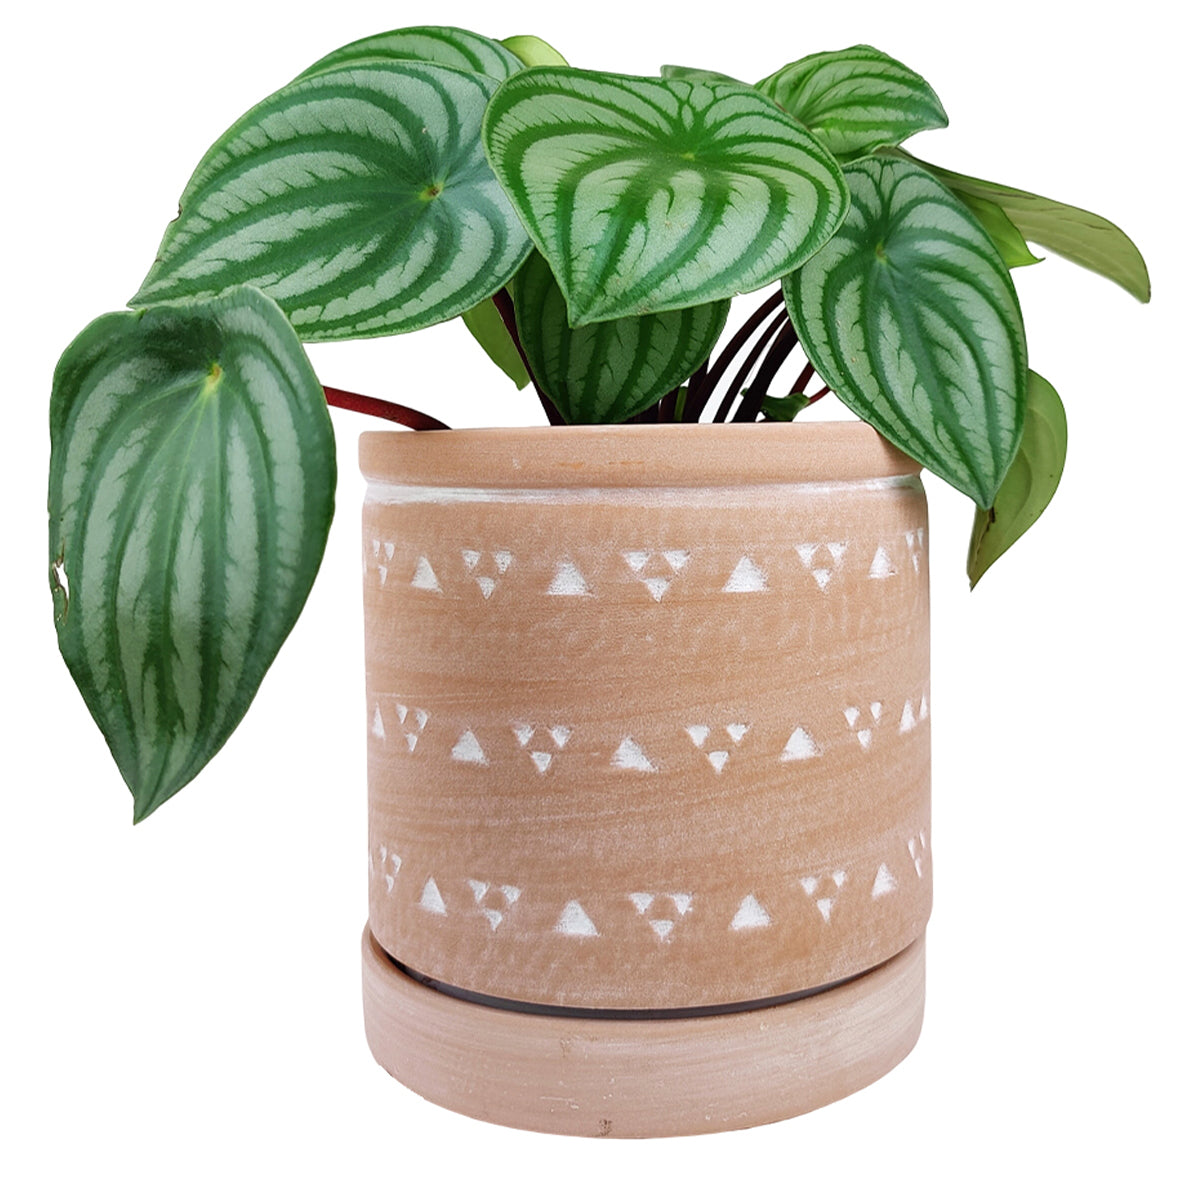 6" Triangle Pattern Flower Pot with Drainage Hole, 6 inch Cylindrical Terracotta Pot with Coaster for Succulent and Houseplant, Terracotta Pottery Succulent Planter for Sale